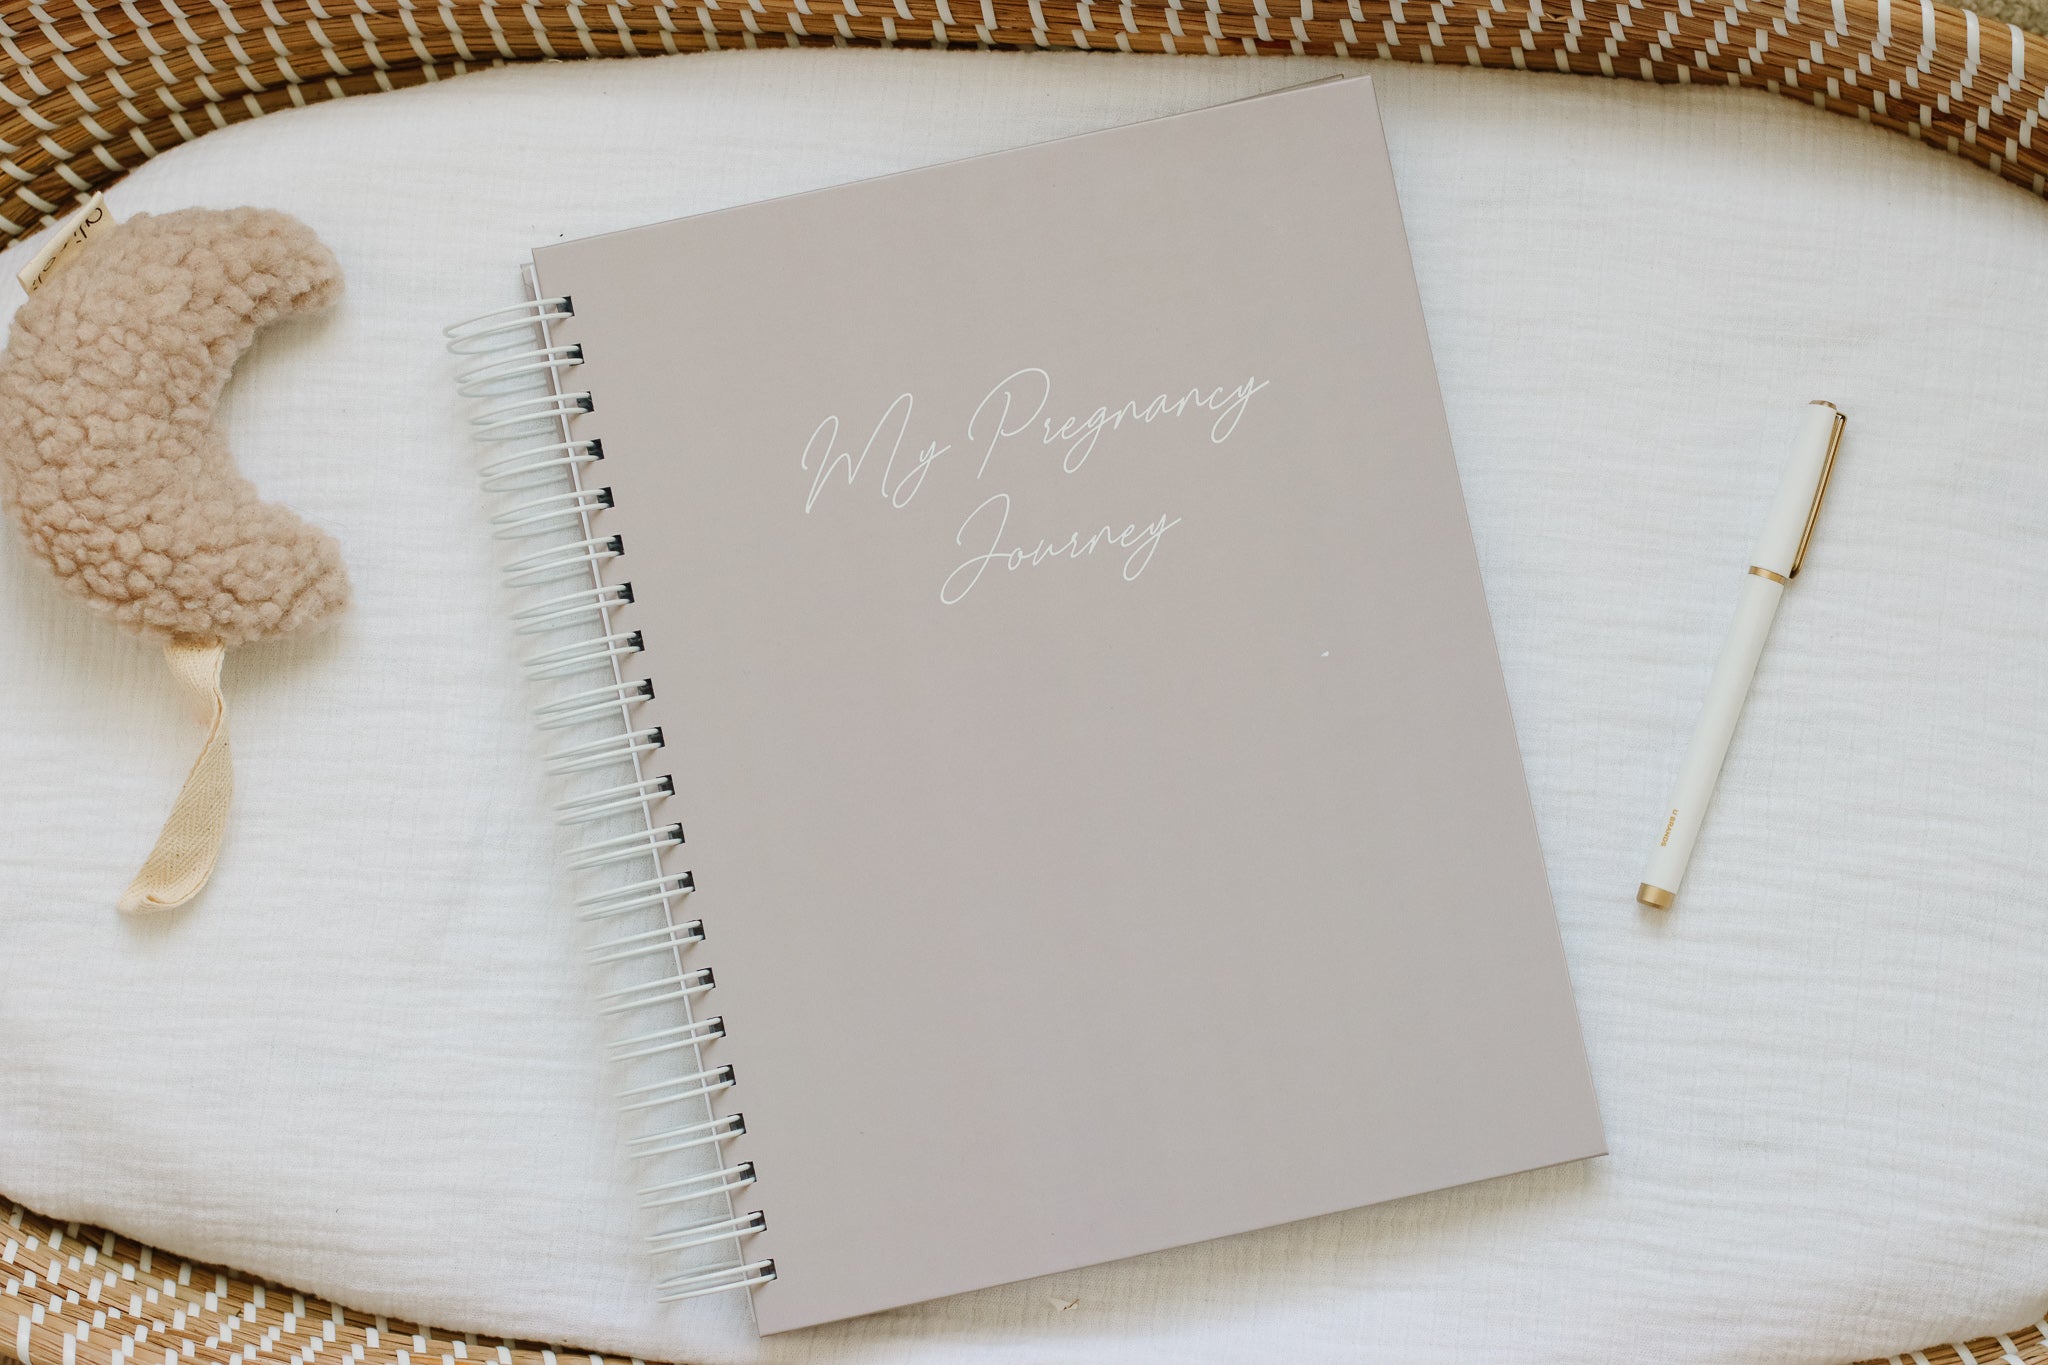 Oatmeal Pregnancy Journal (Imperfect)